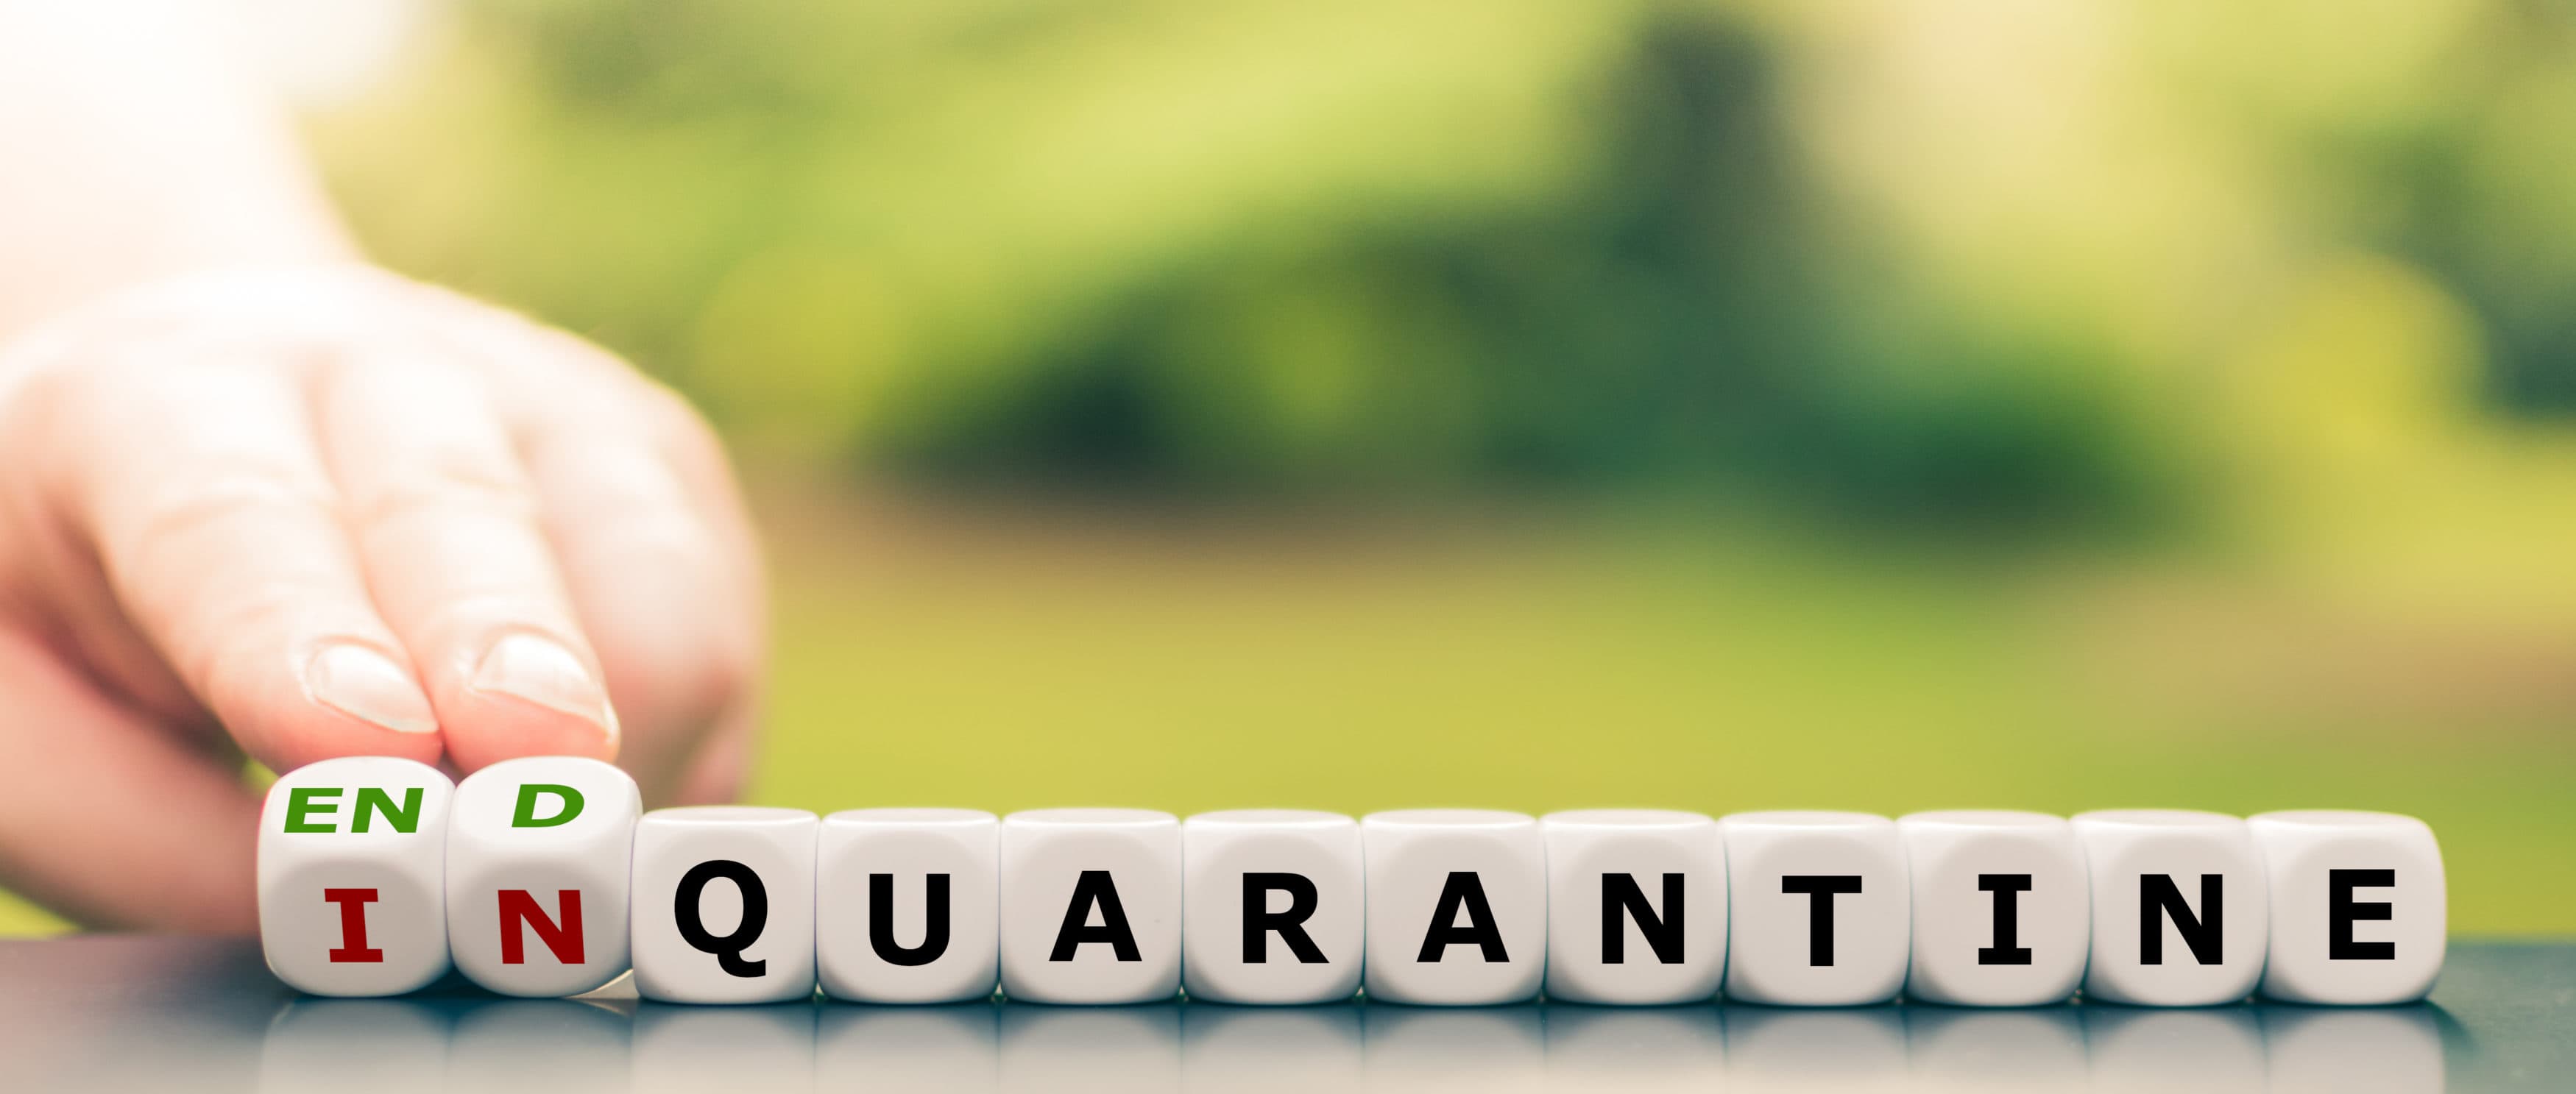 Hand turns dice and changes the expression "in quarantine" to "end quarantine".